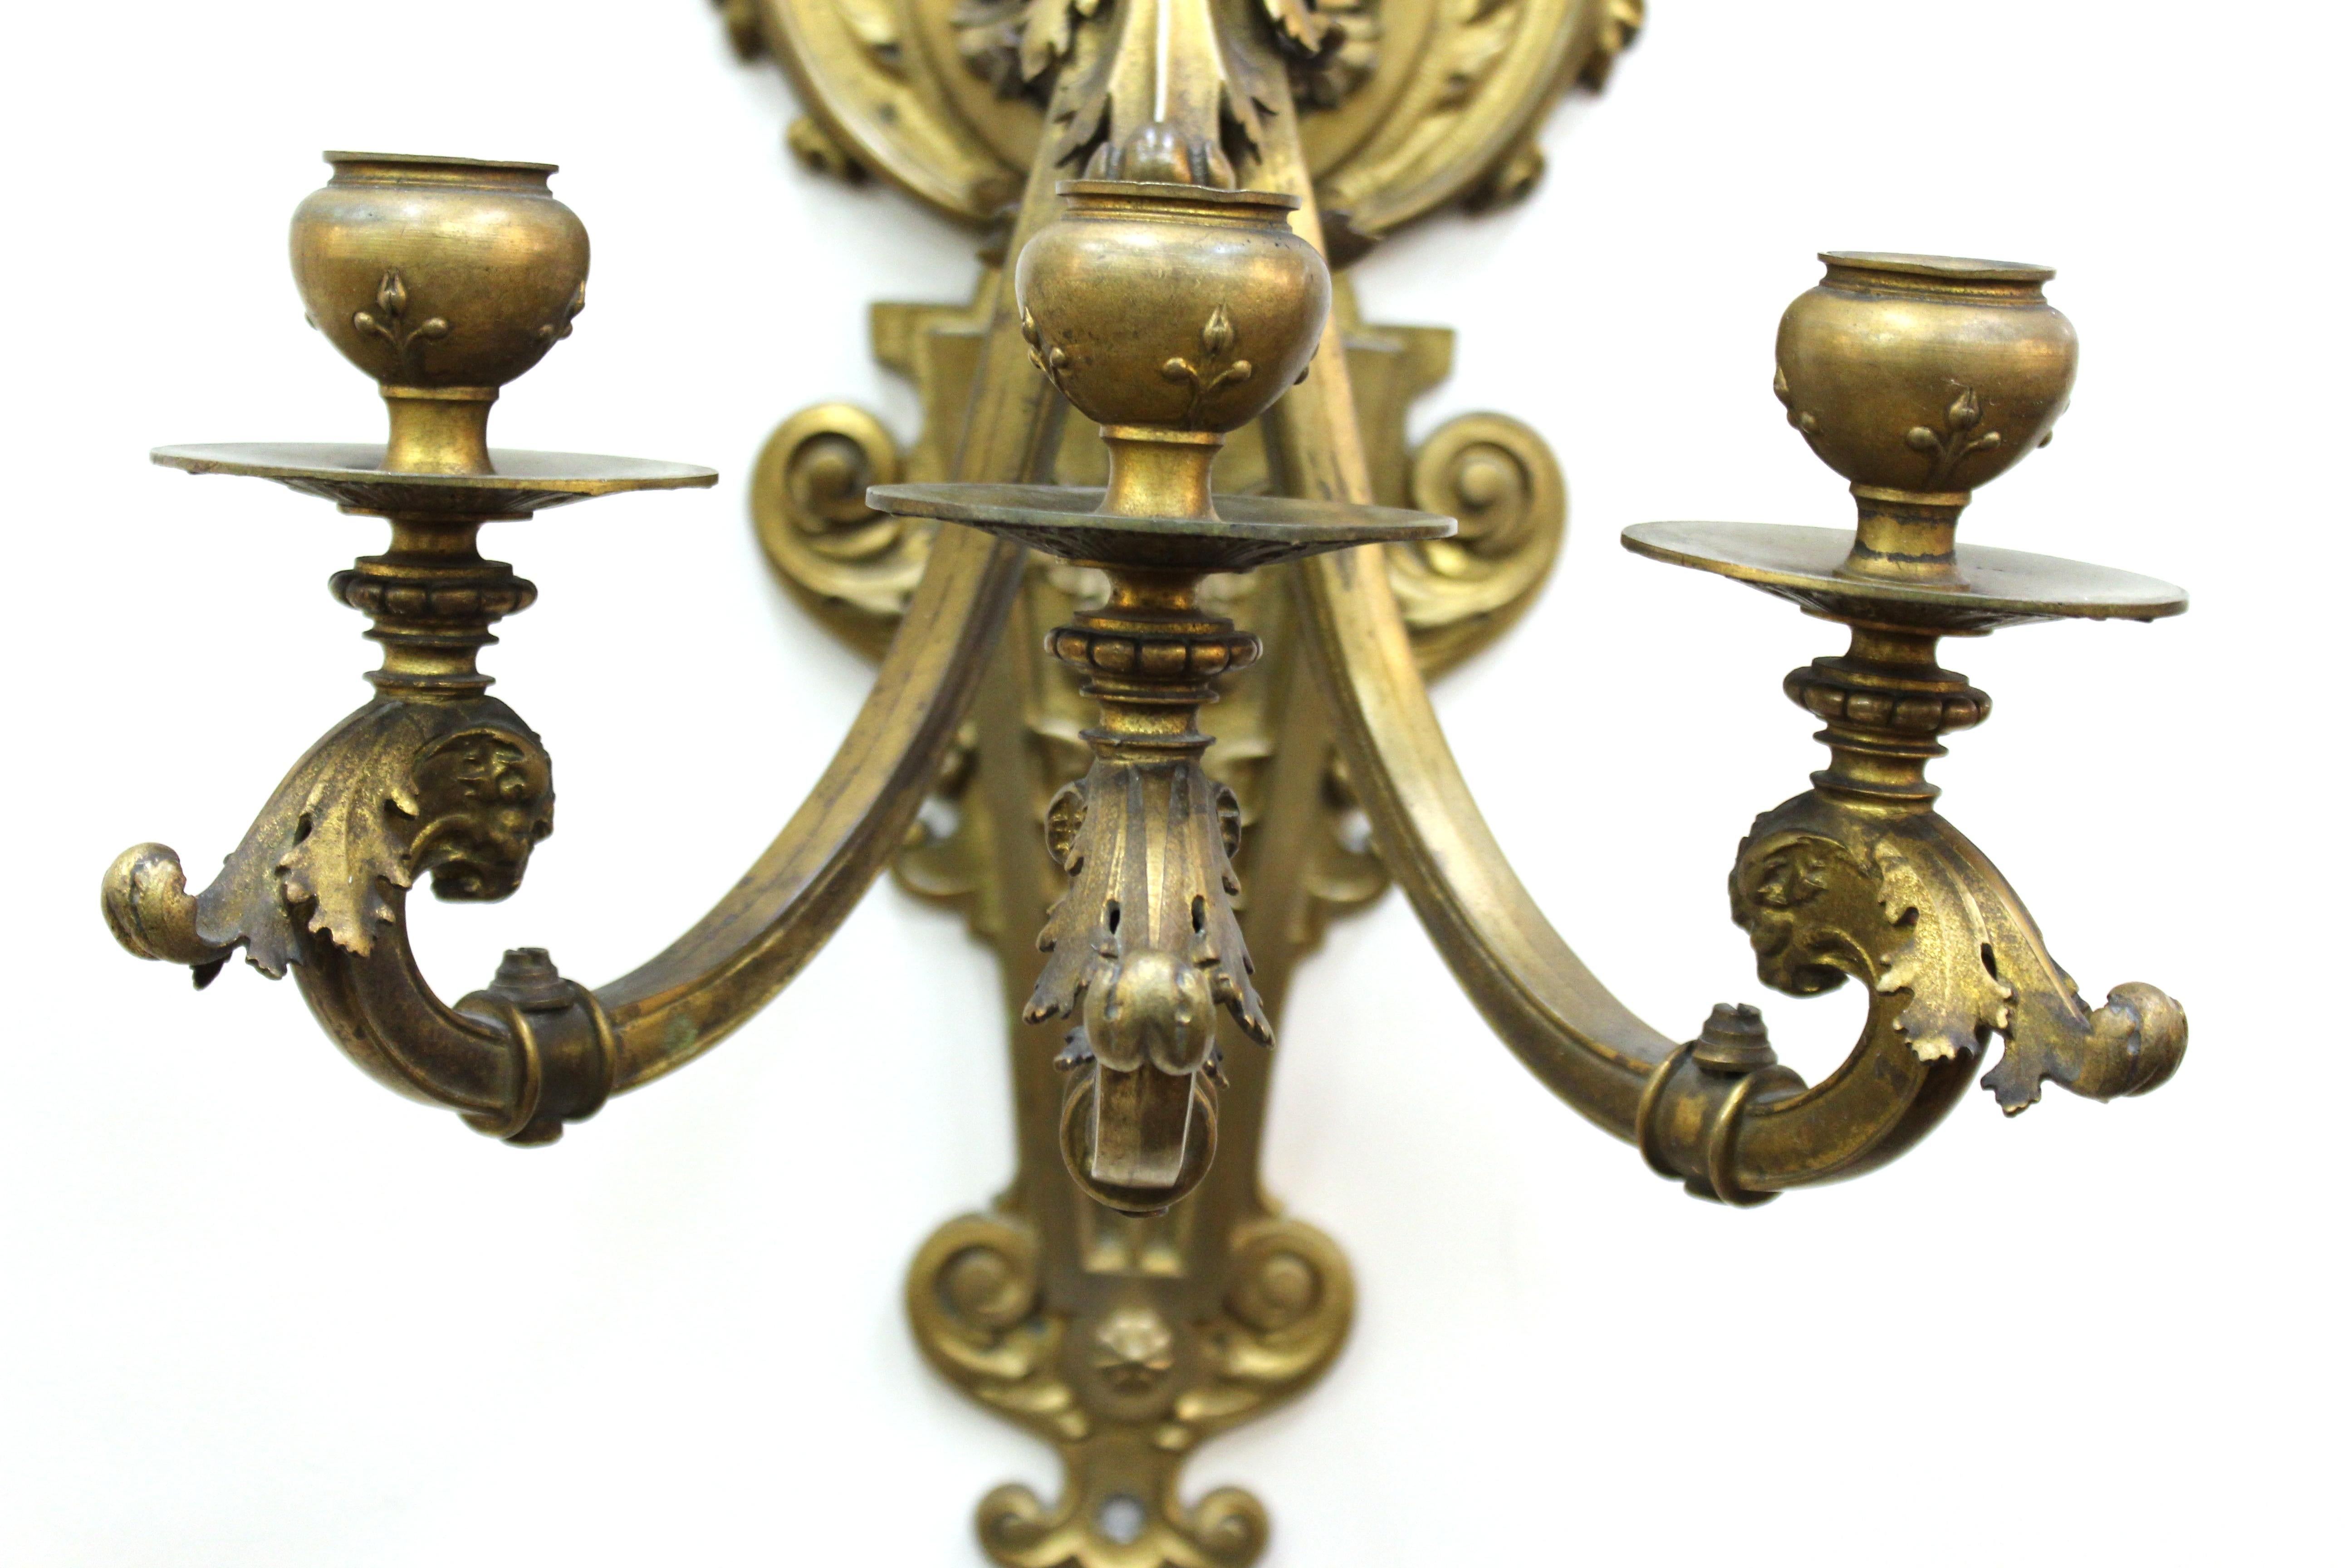 Late 19th Century American Gilded Age Neoclassical Style Candelabra Sconces in Gilt Bronze